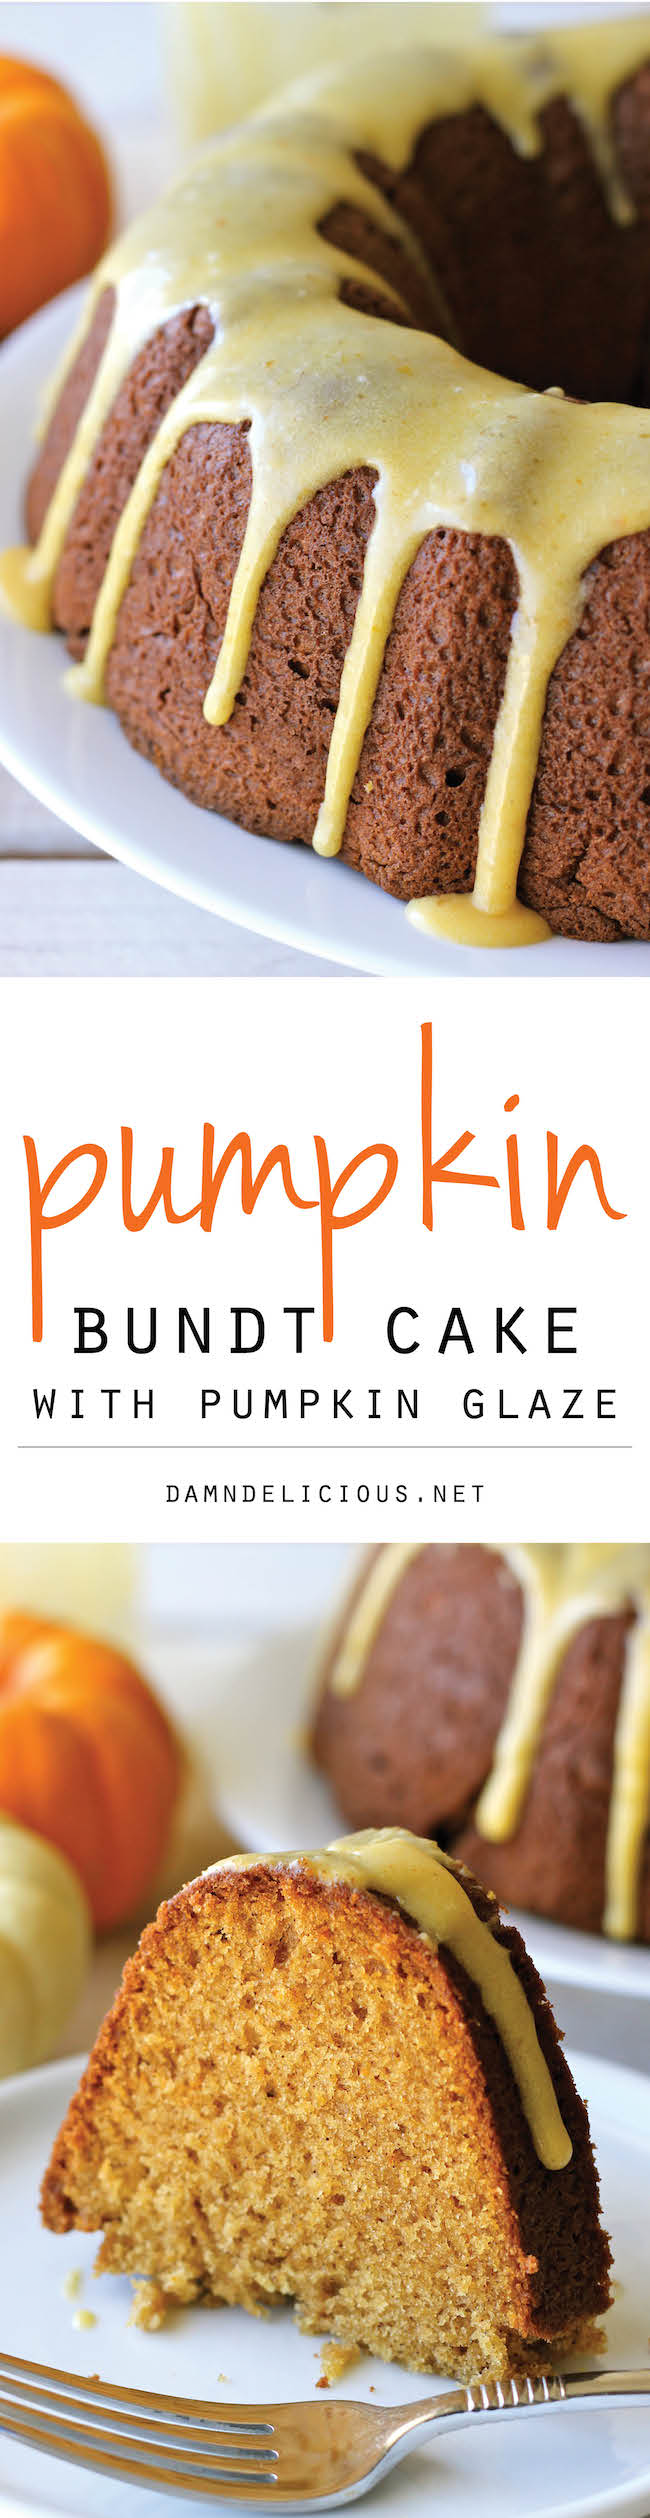 Pumpkin Bundt Cake with Pumpkin Glaze - A perfect fall cake that you'll want to make it all year long!